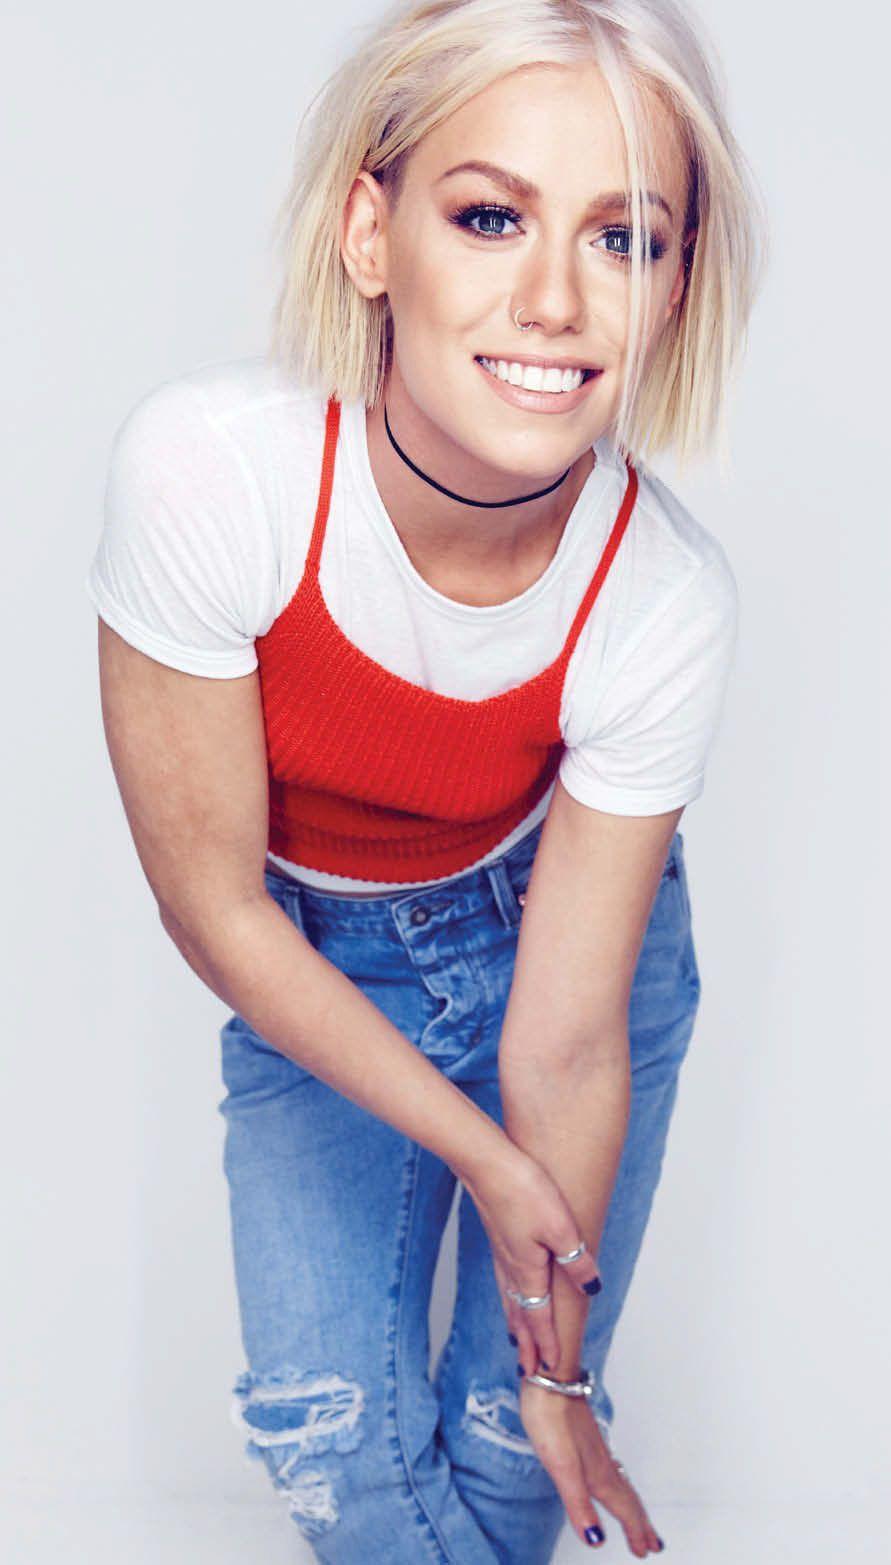 Jenna Mcdougall Image. Full HD Picture